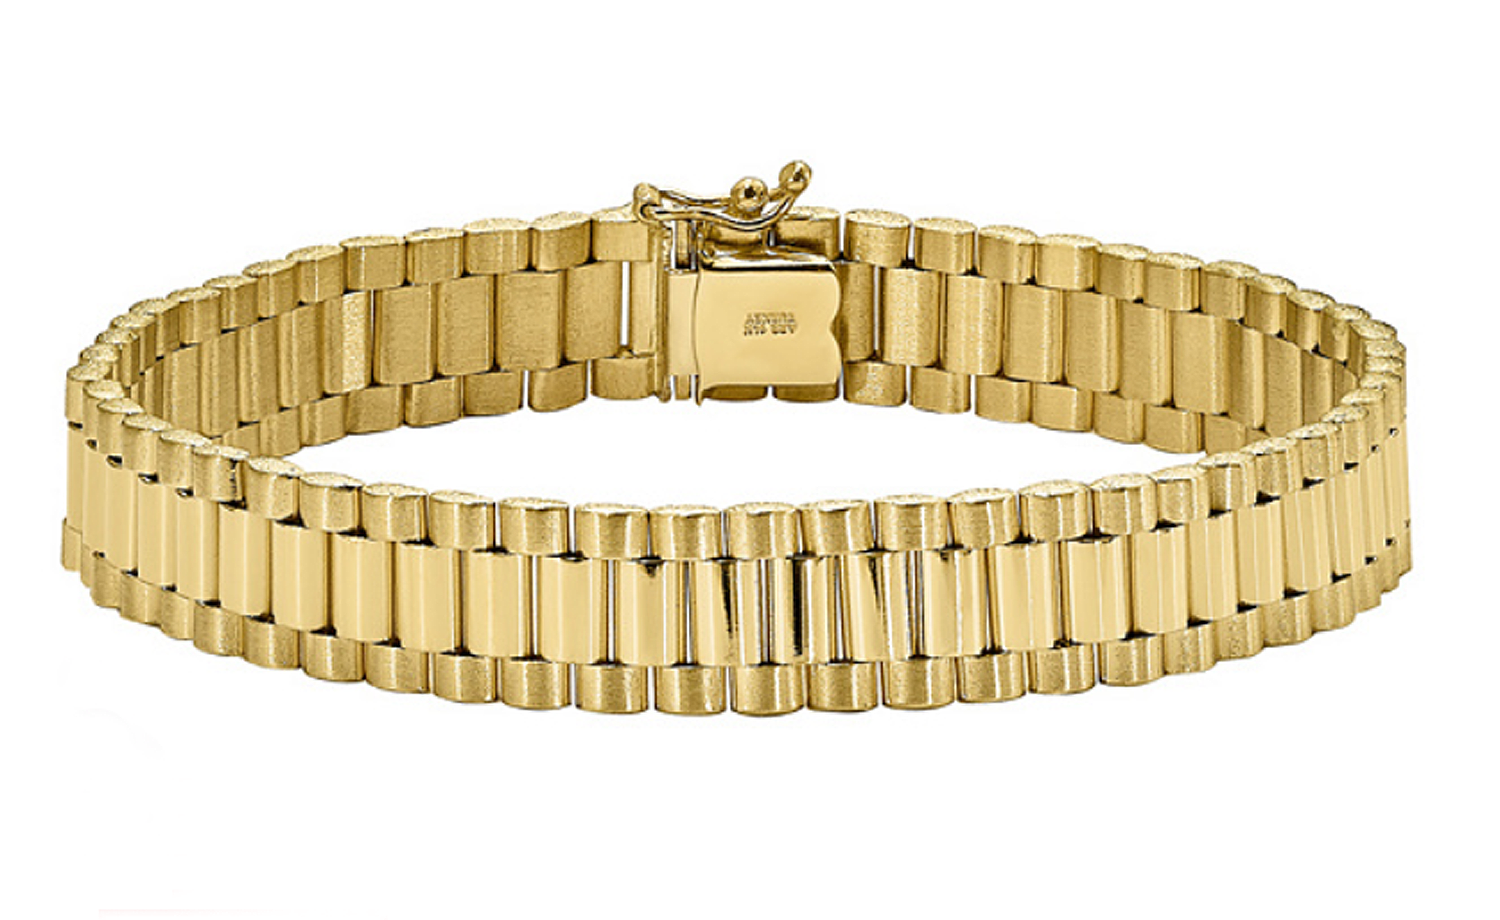 Men's Satin 14k Yellow Gold 10mm Solid Link Bracelet, 8 inches.